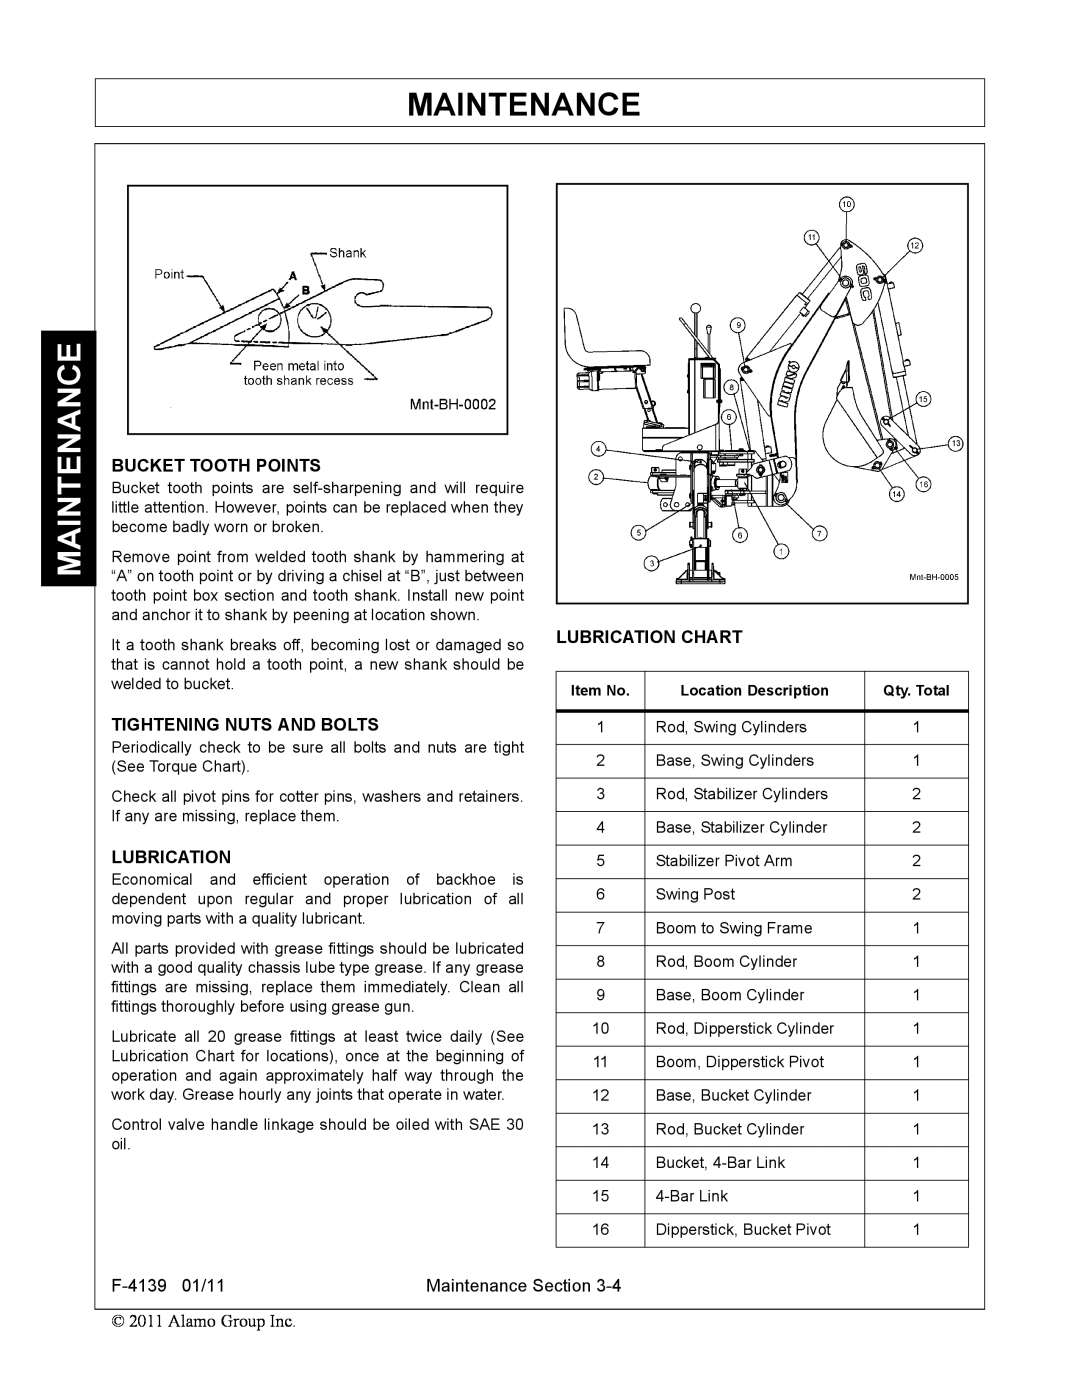 Servis-Rhino 60C manual Maintenance, Bucket Tooth Points, Tightening Nuts And Bolts, Lubrication Chart, Alamo Group Inc 